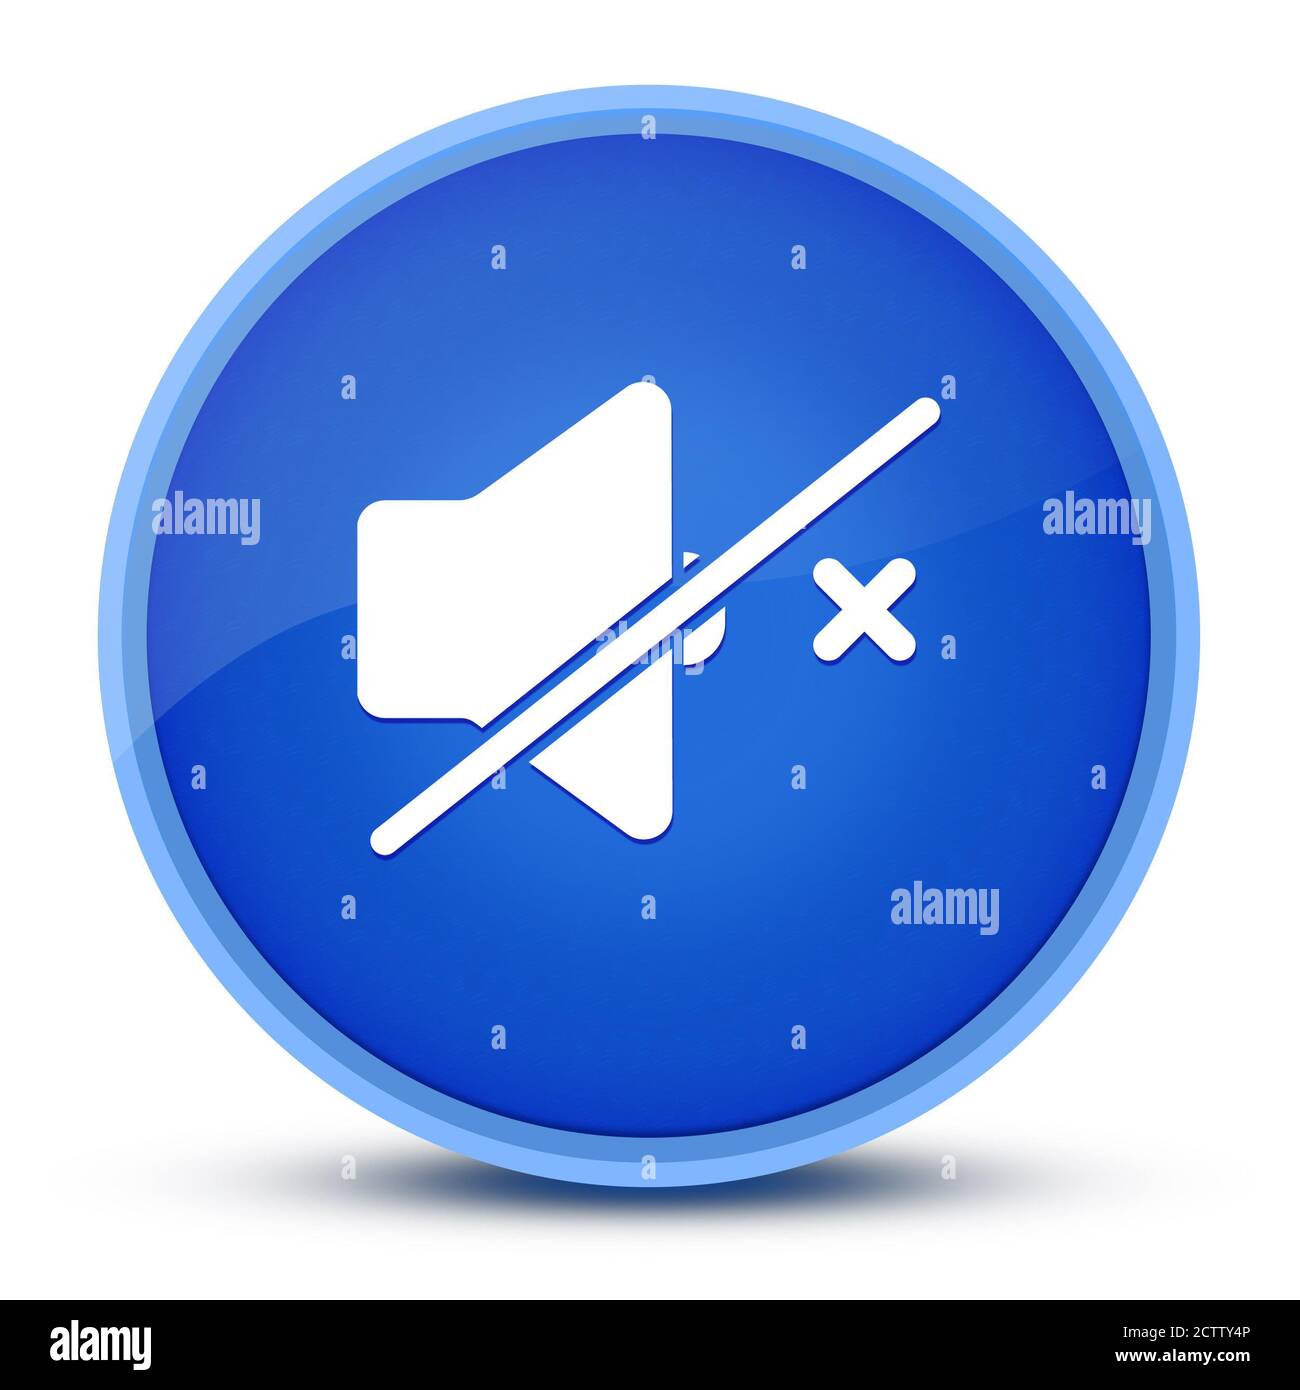 Mute speaker luxurious glossy blue round button abstract illustration Stock Photo